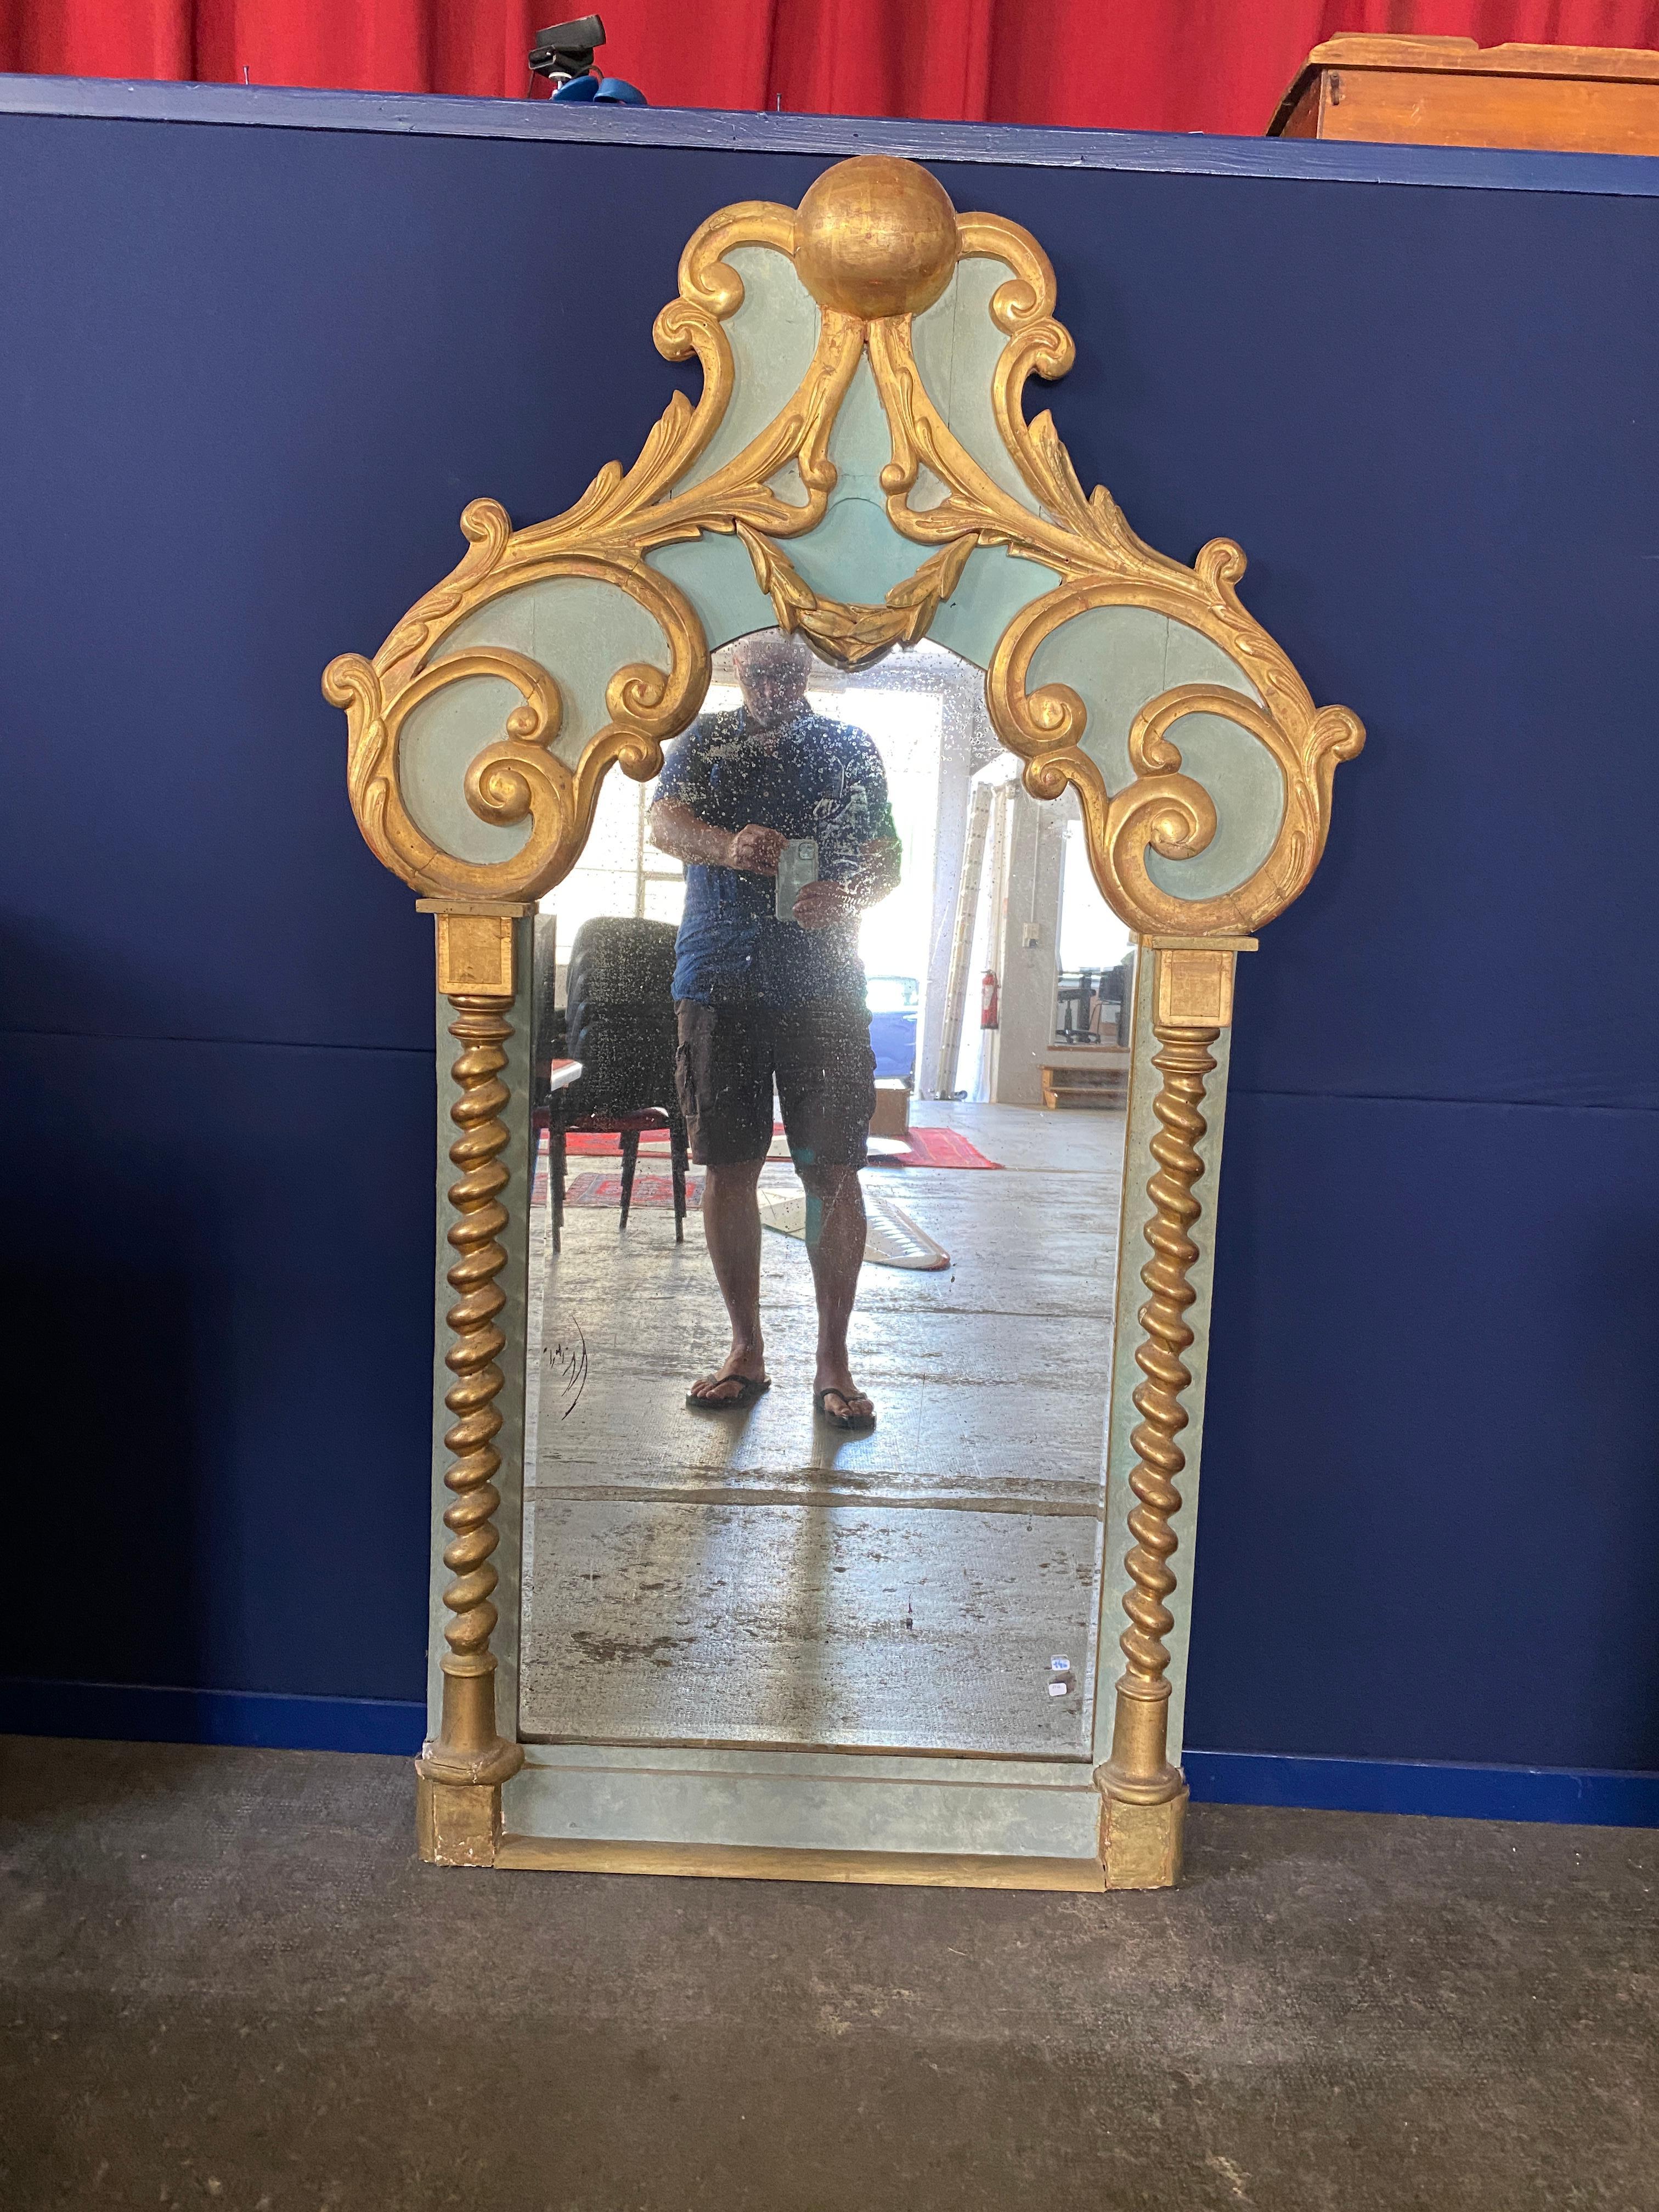 Rare baroque mirror circa 1900-1930, in lacquered and gilded wood
The tain of the mirror is worn.